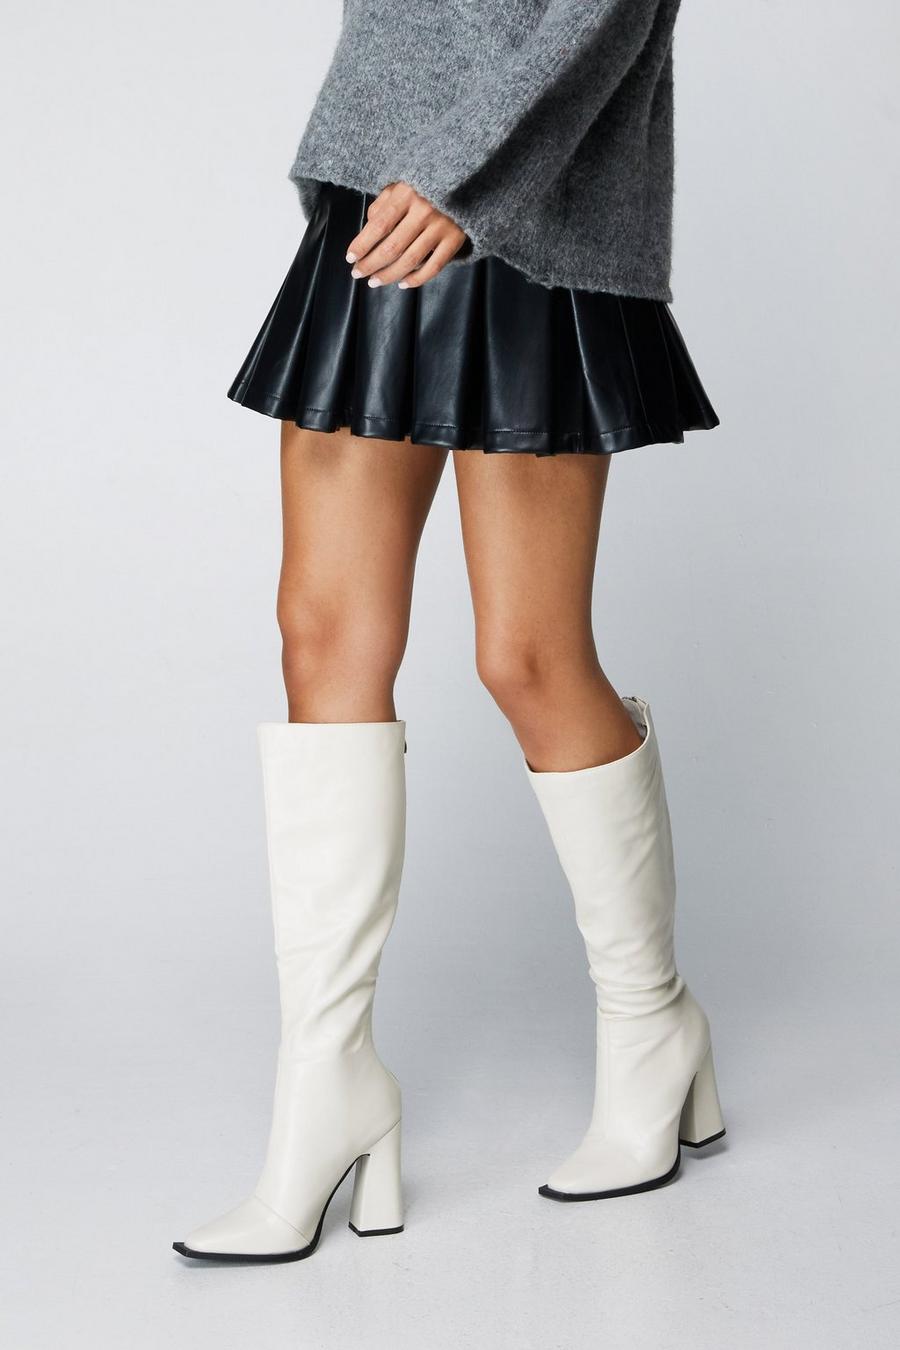 Square Toe Heeled Knee High Boots